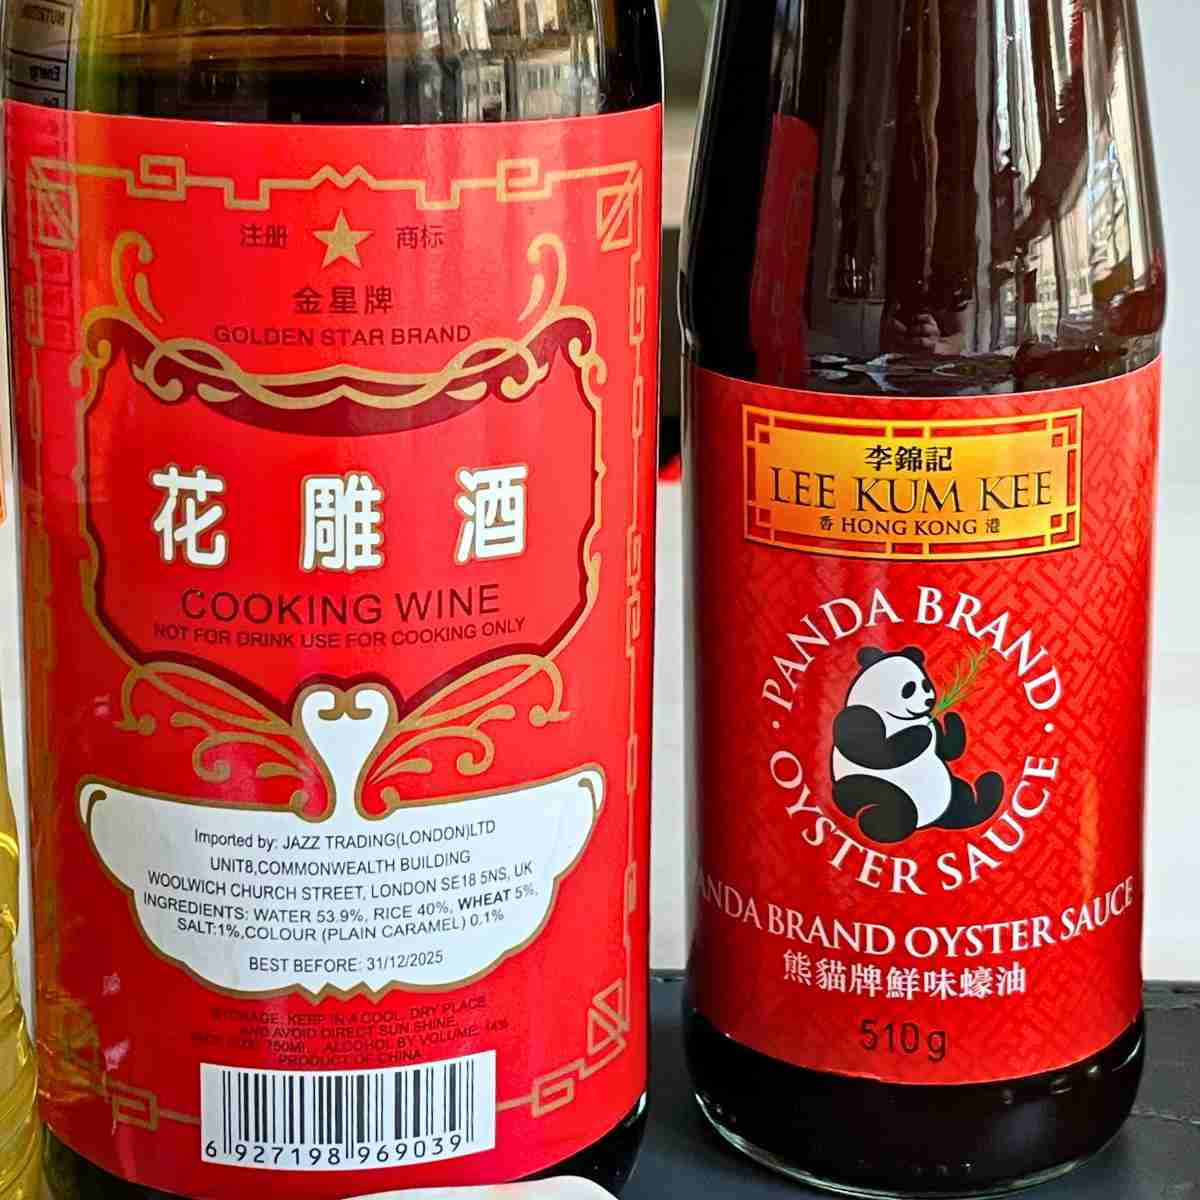 Shaoxing wine and oyster sauce